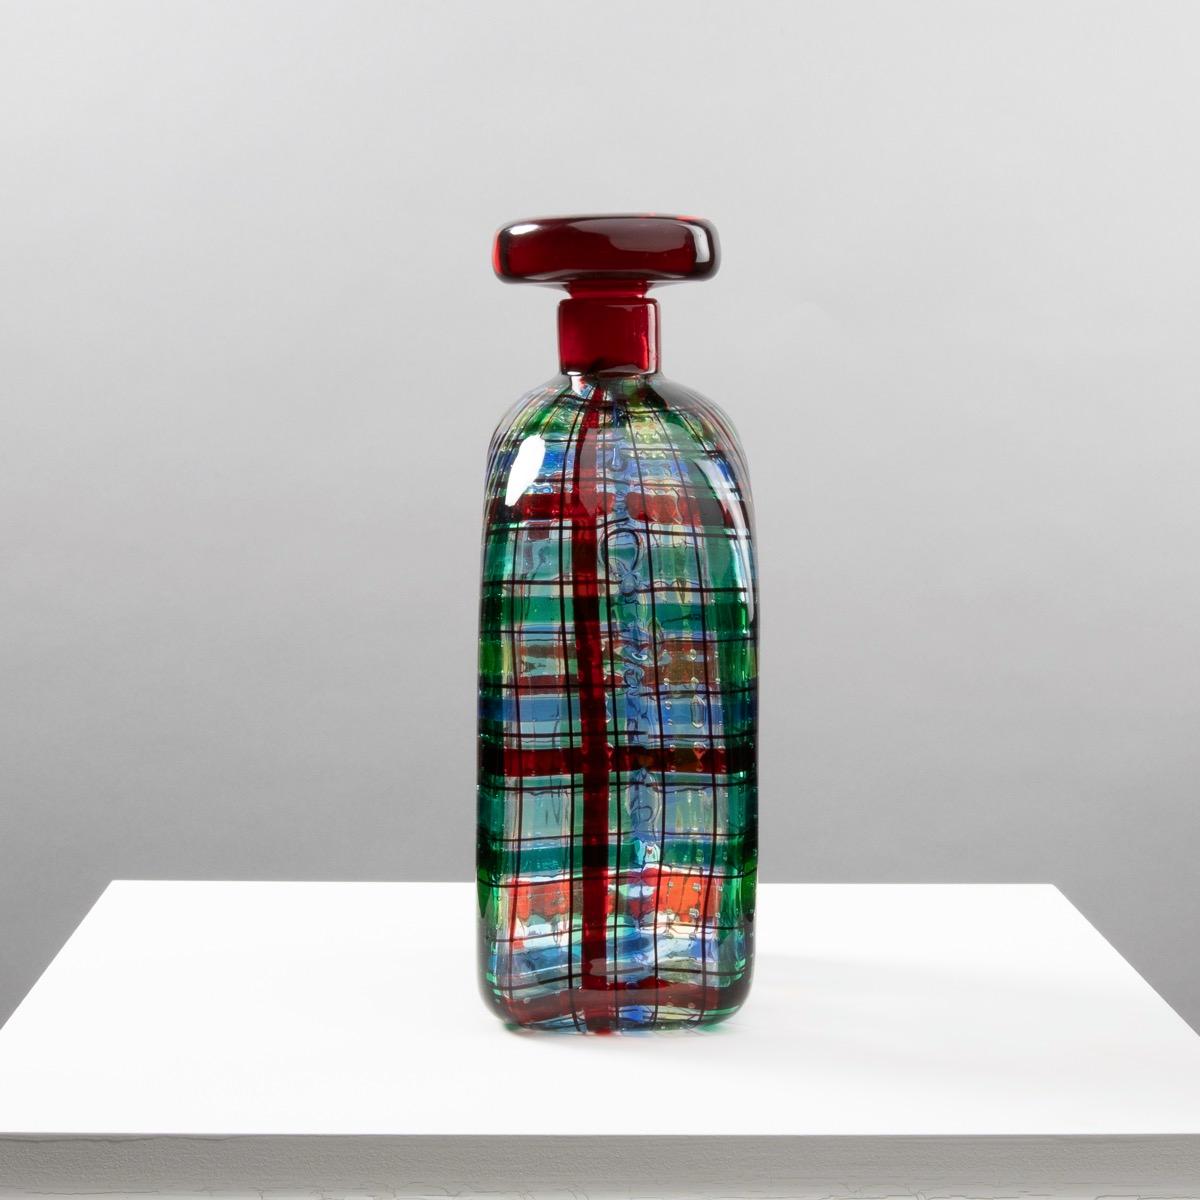 In 1969, Christian Dior asked Ercole Barovier to develop, design and produce a series of bottles with stopper. 
This series is inspired by Scottish weaves and was made by Barovier for Maison Christian Dior exclusively.  
 
The bottle is made by